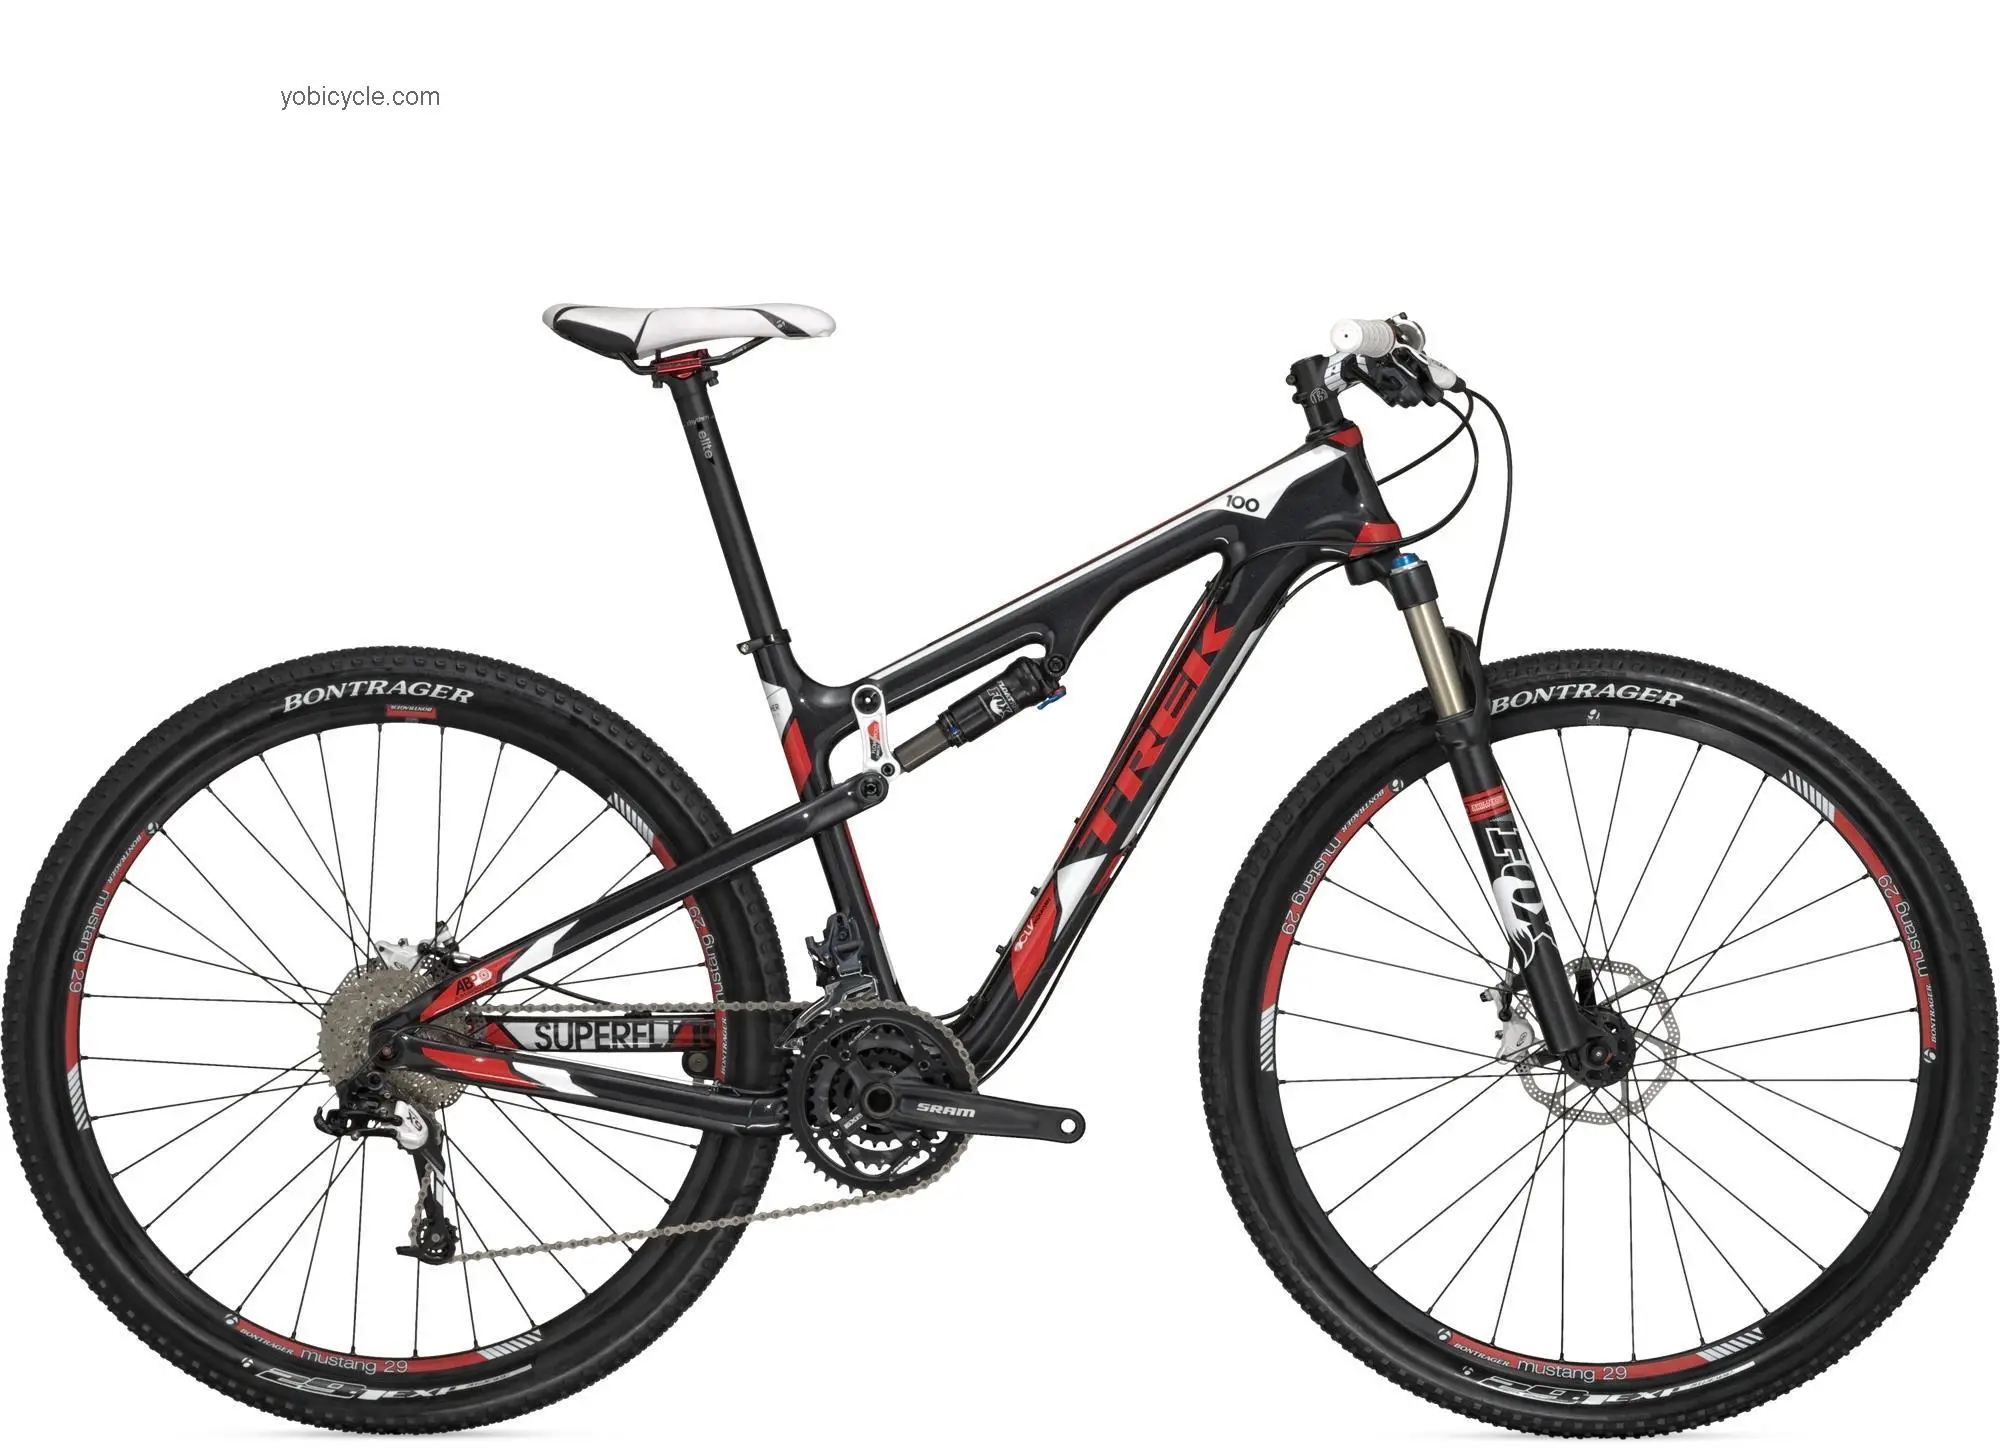 Trek Superfly 100 2012 comparison online with competitors